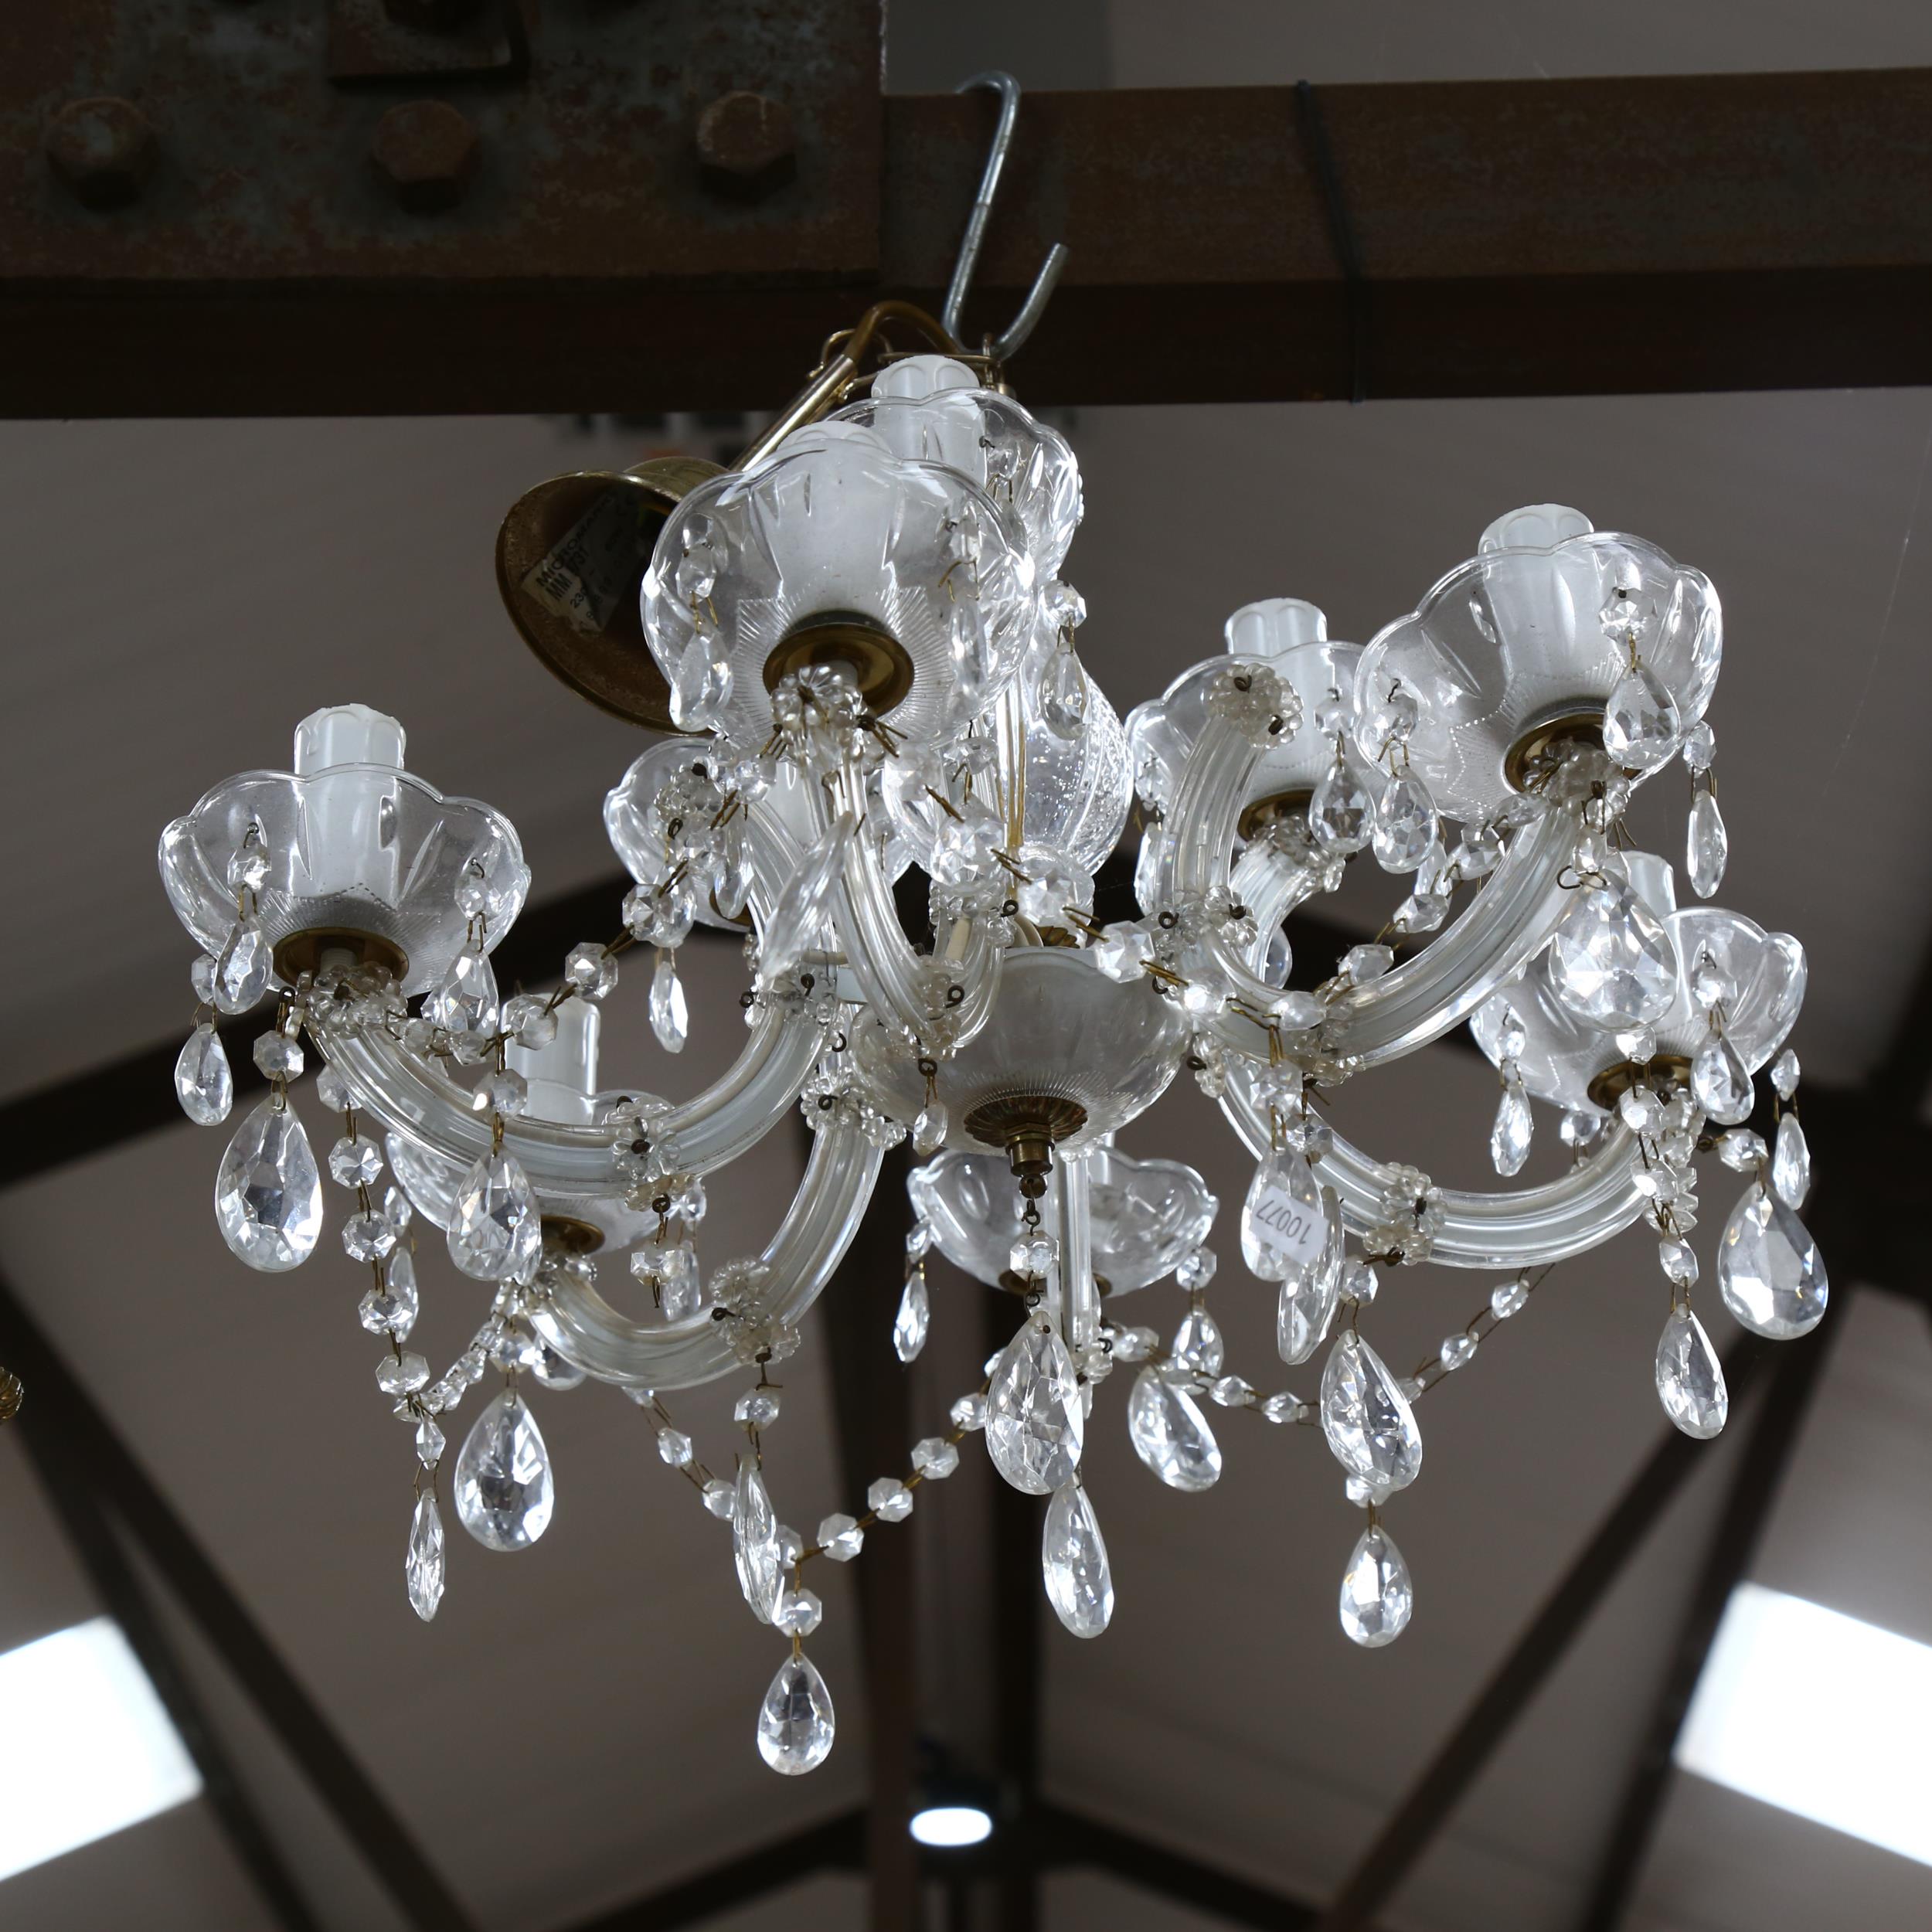 Vintage 6-brand glass chandelier with lustre drops